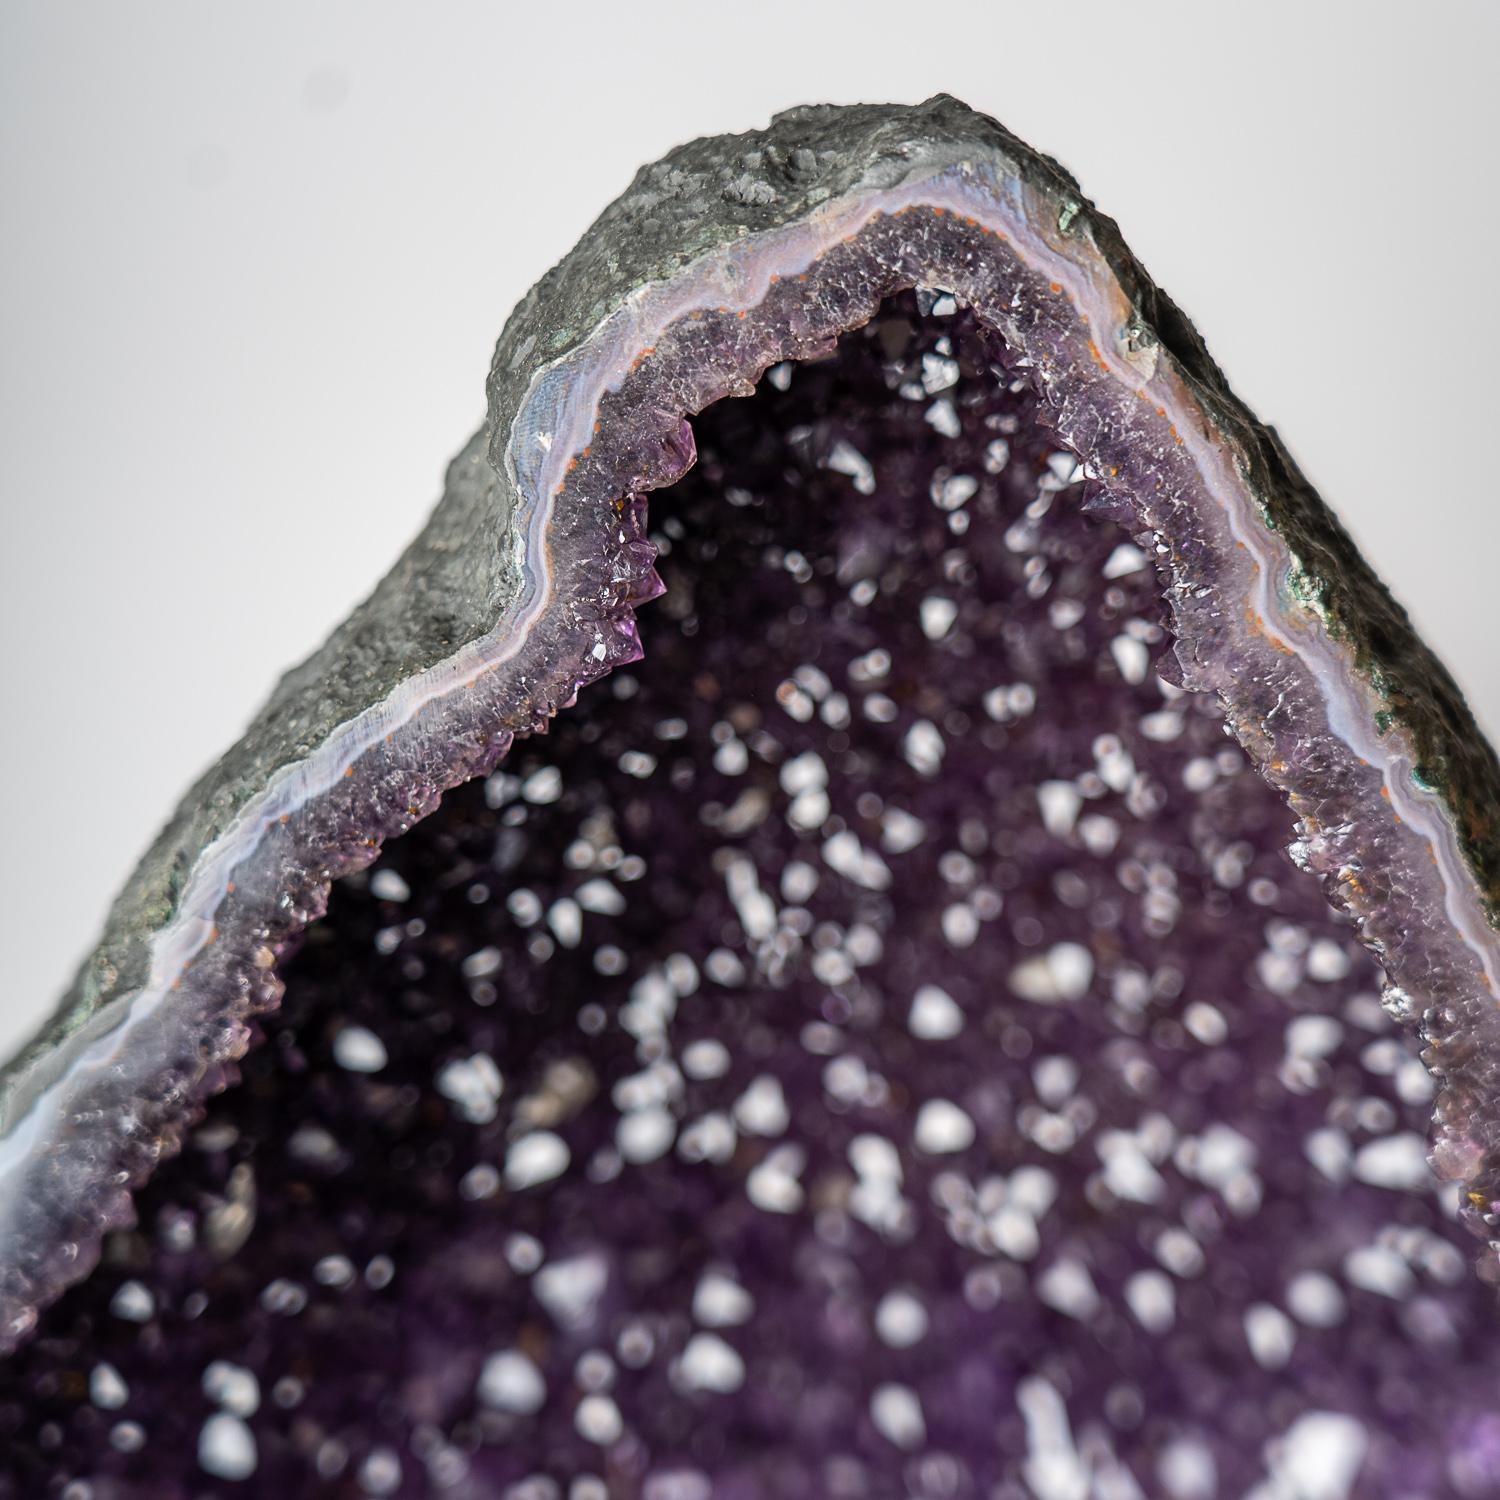 AAA museum quality, massive Brazilian Amethyst geode. This specimen is lined with large lustrous crystallized gems - transparent to translucent amethyst variety quartz crystals - with deep grape purple color and highly reflective terminated faces.